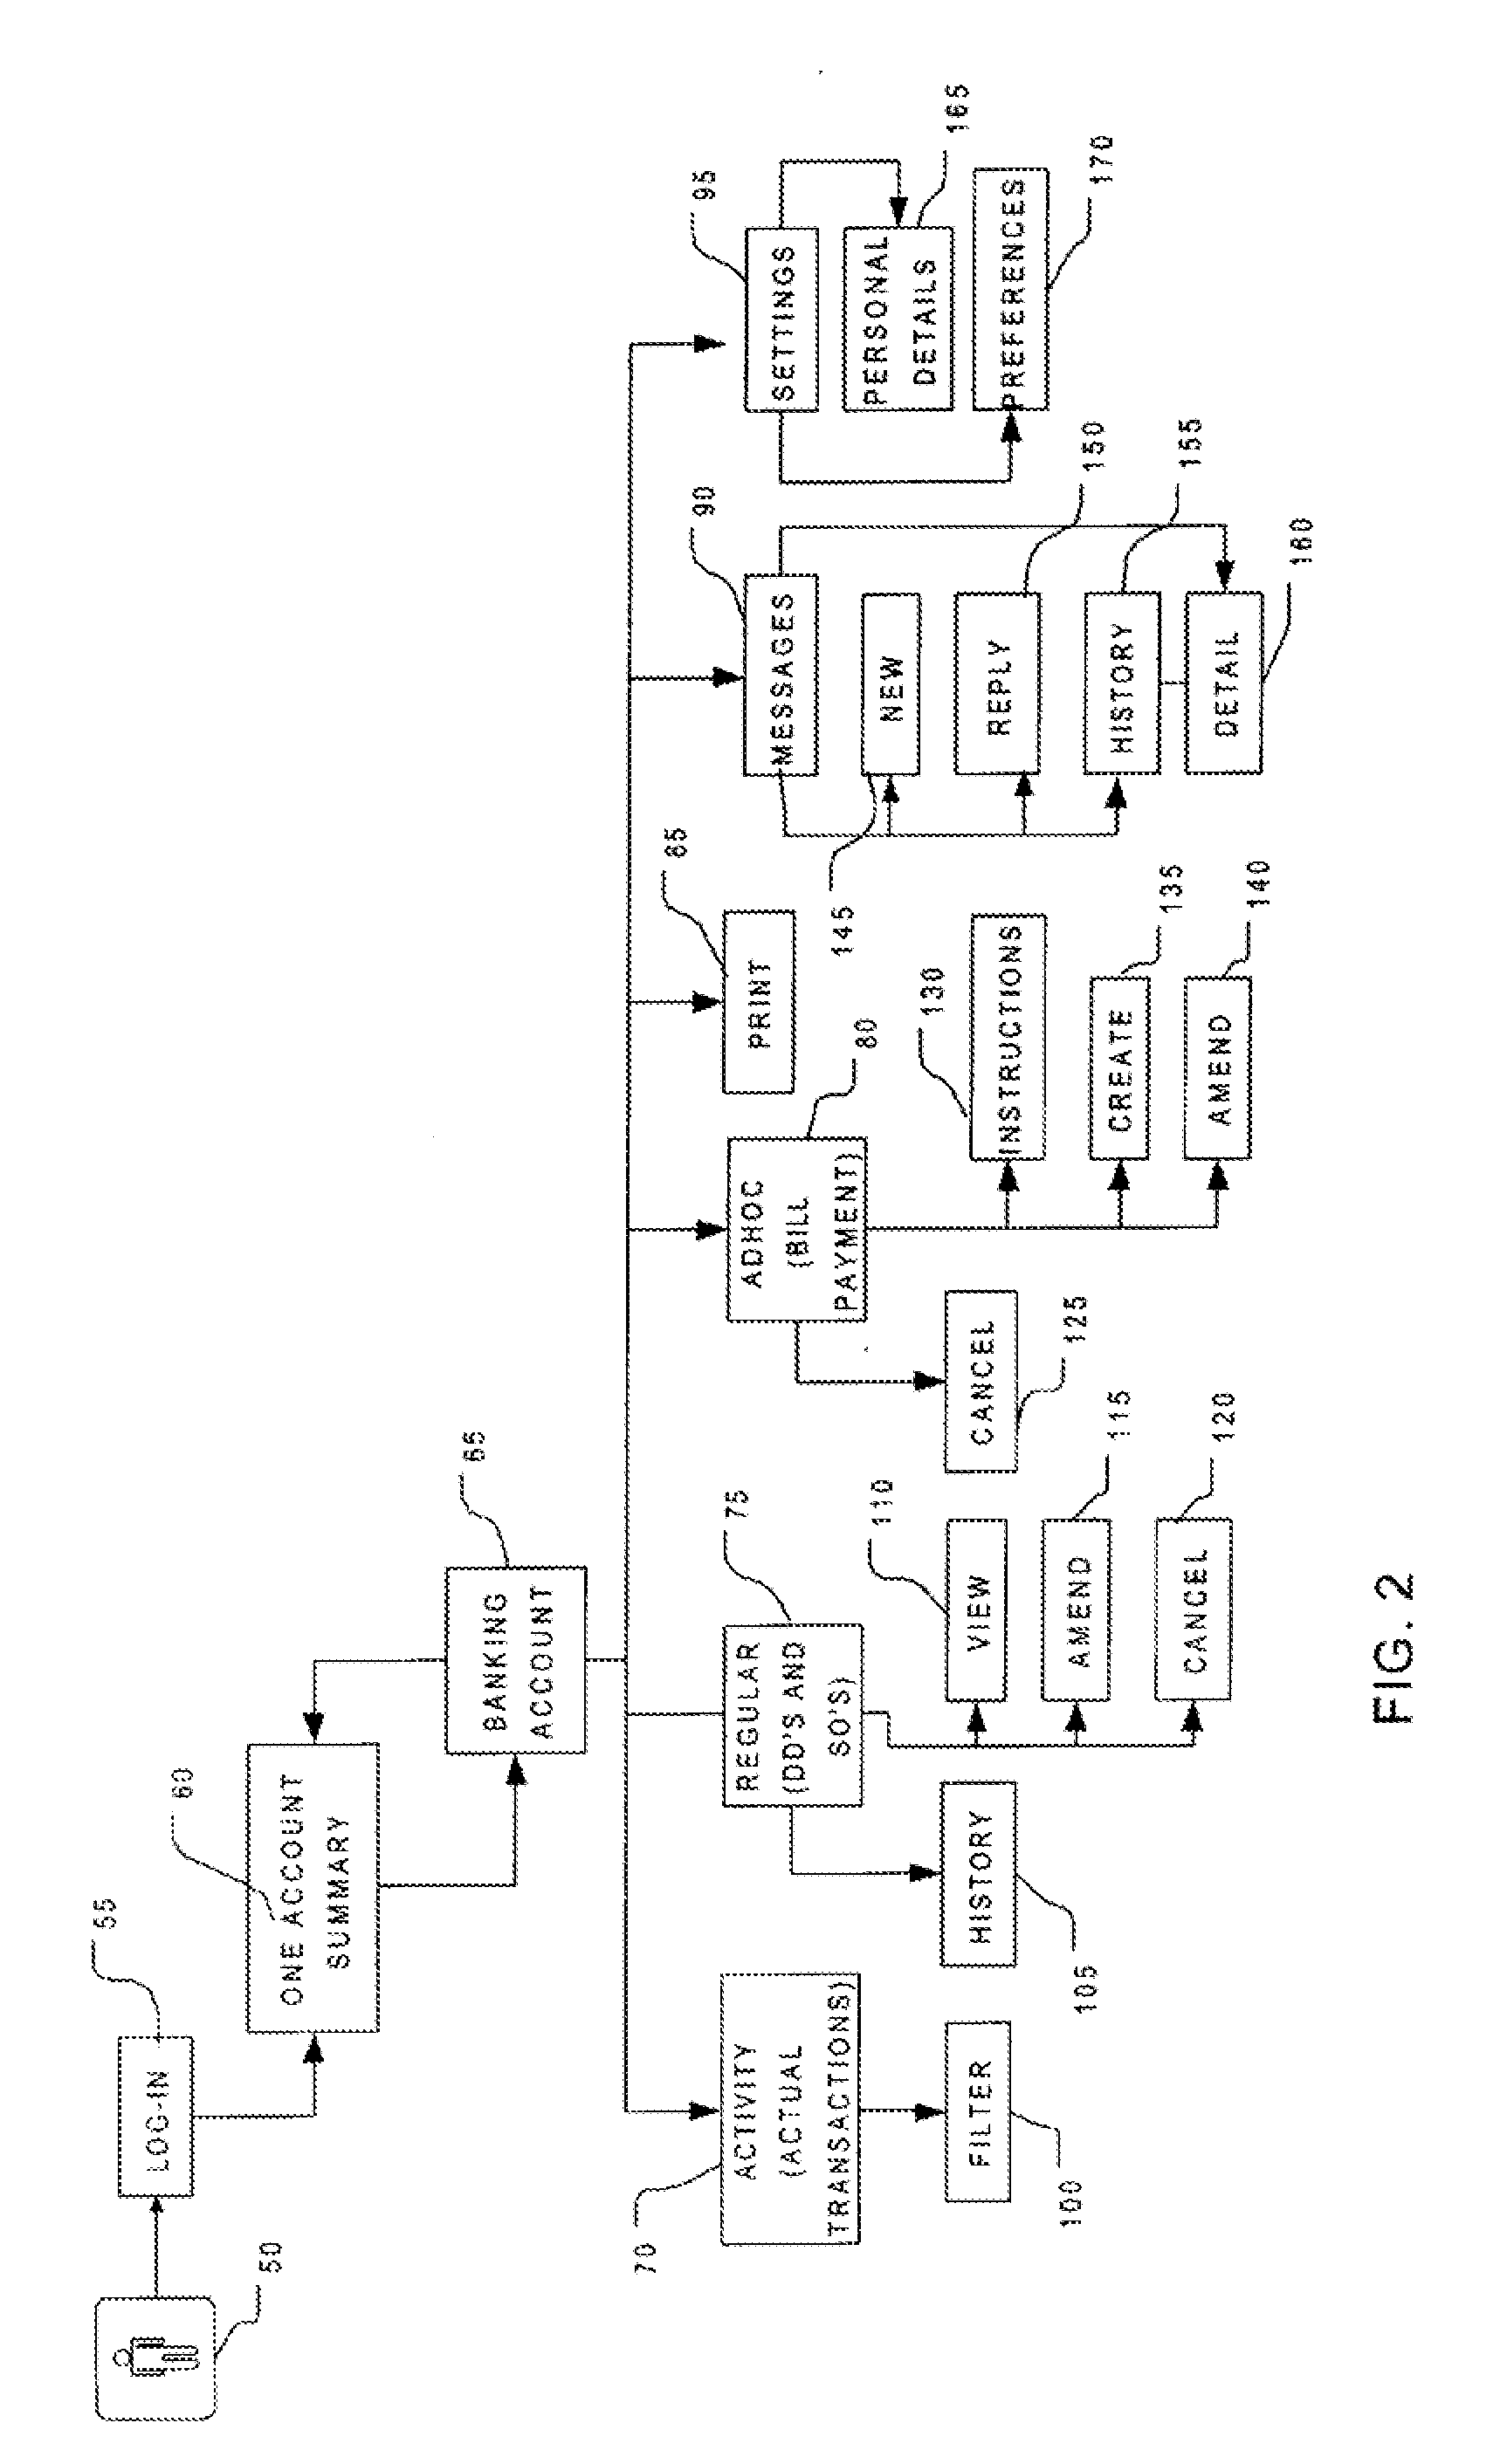 Financial management system, and methods and apparatus for use therein